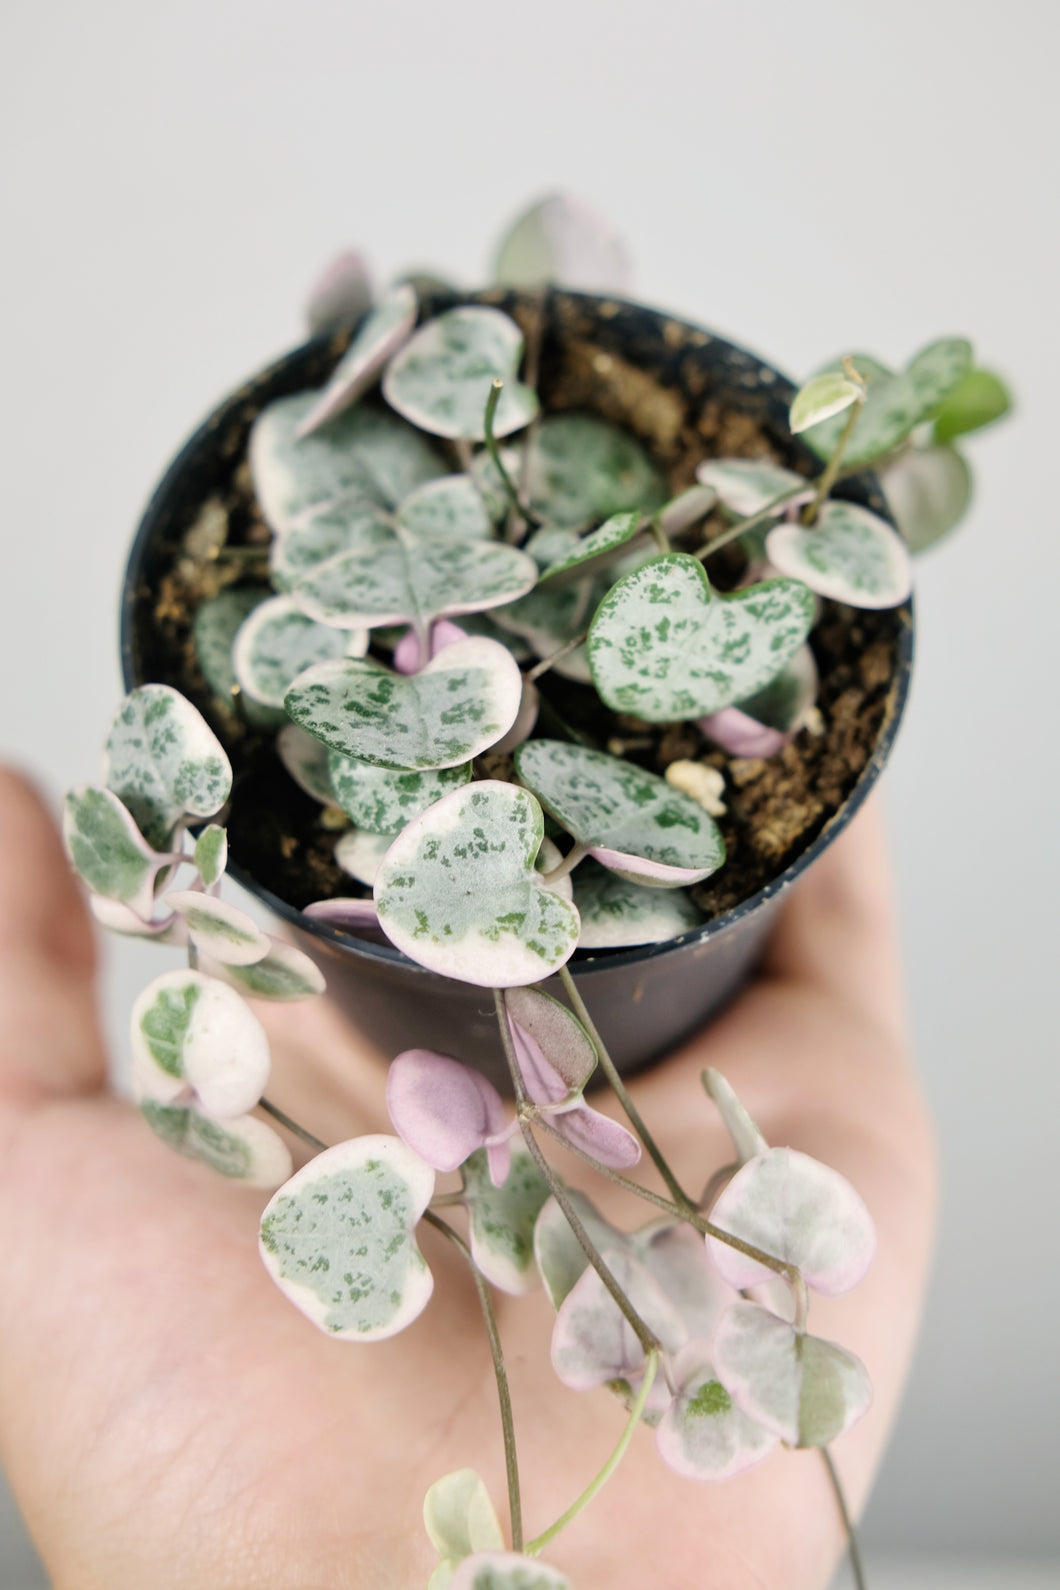 Small Variegated Ceropegia Woodii | Variegated String of Hearts Small